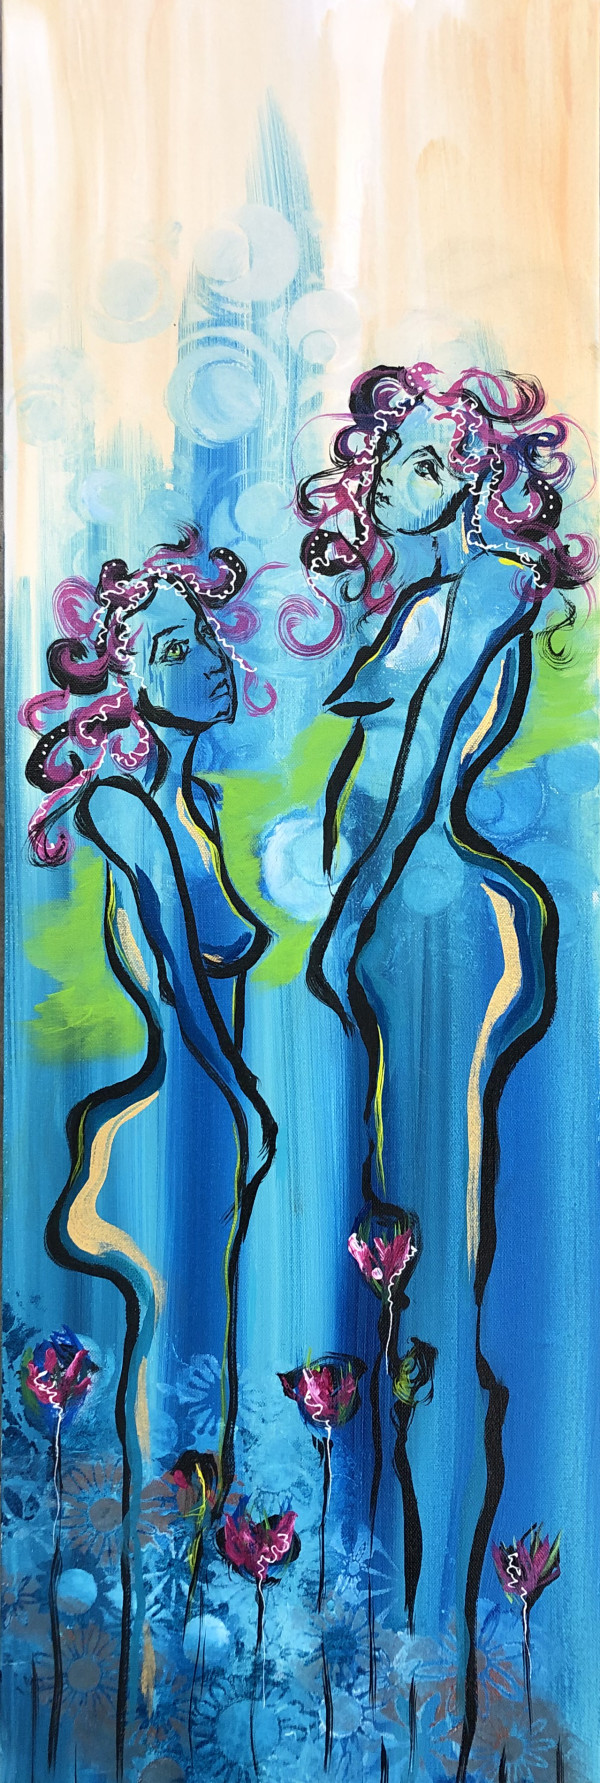 Sisters (in blue) by Evelyn Dufner